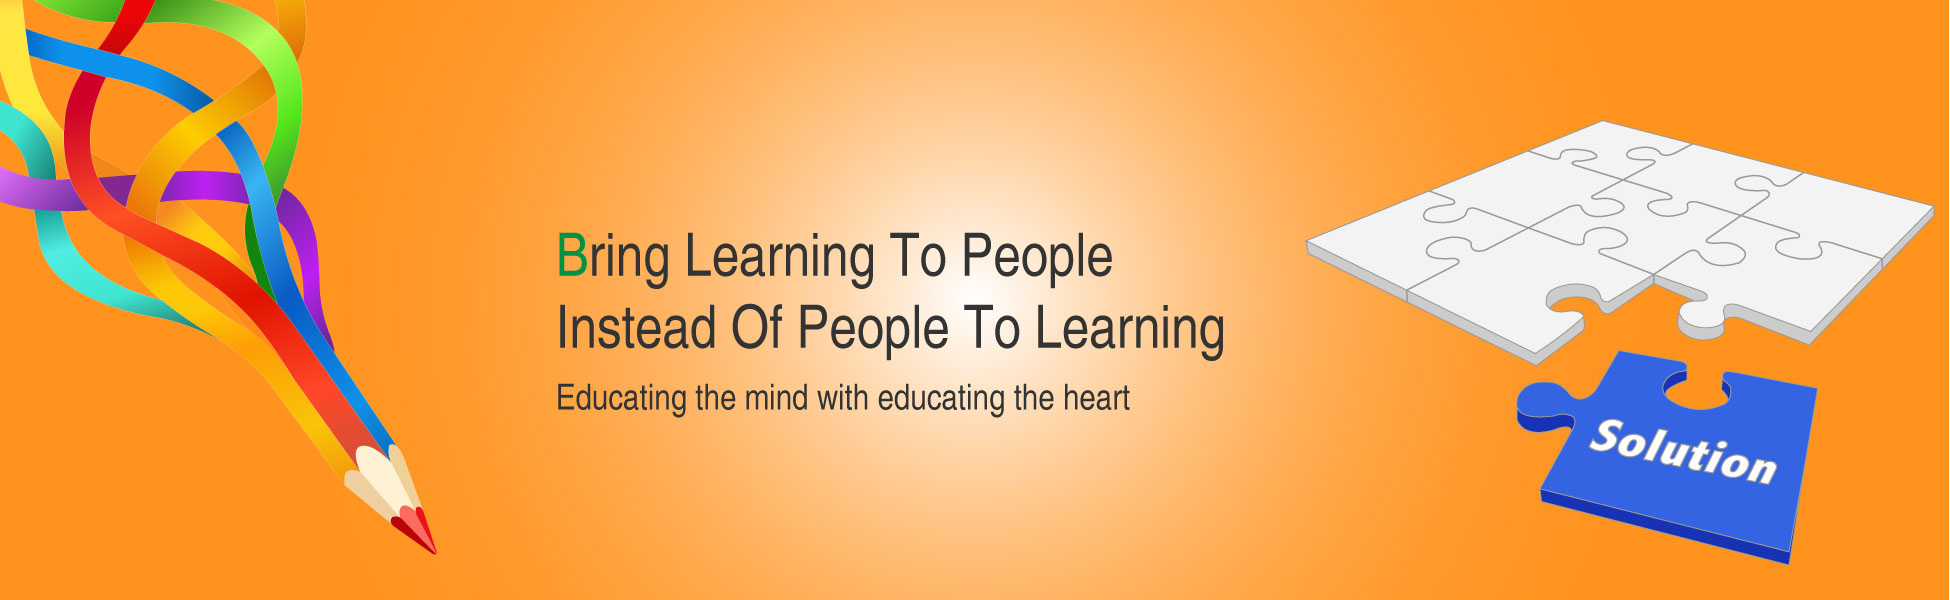 Bring Learning to People